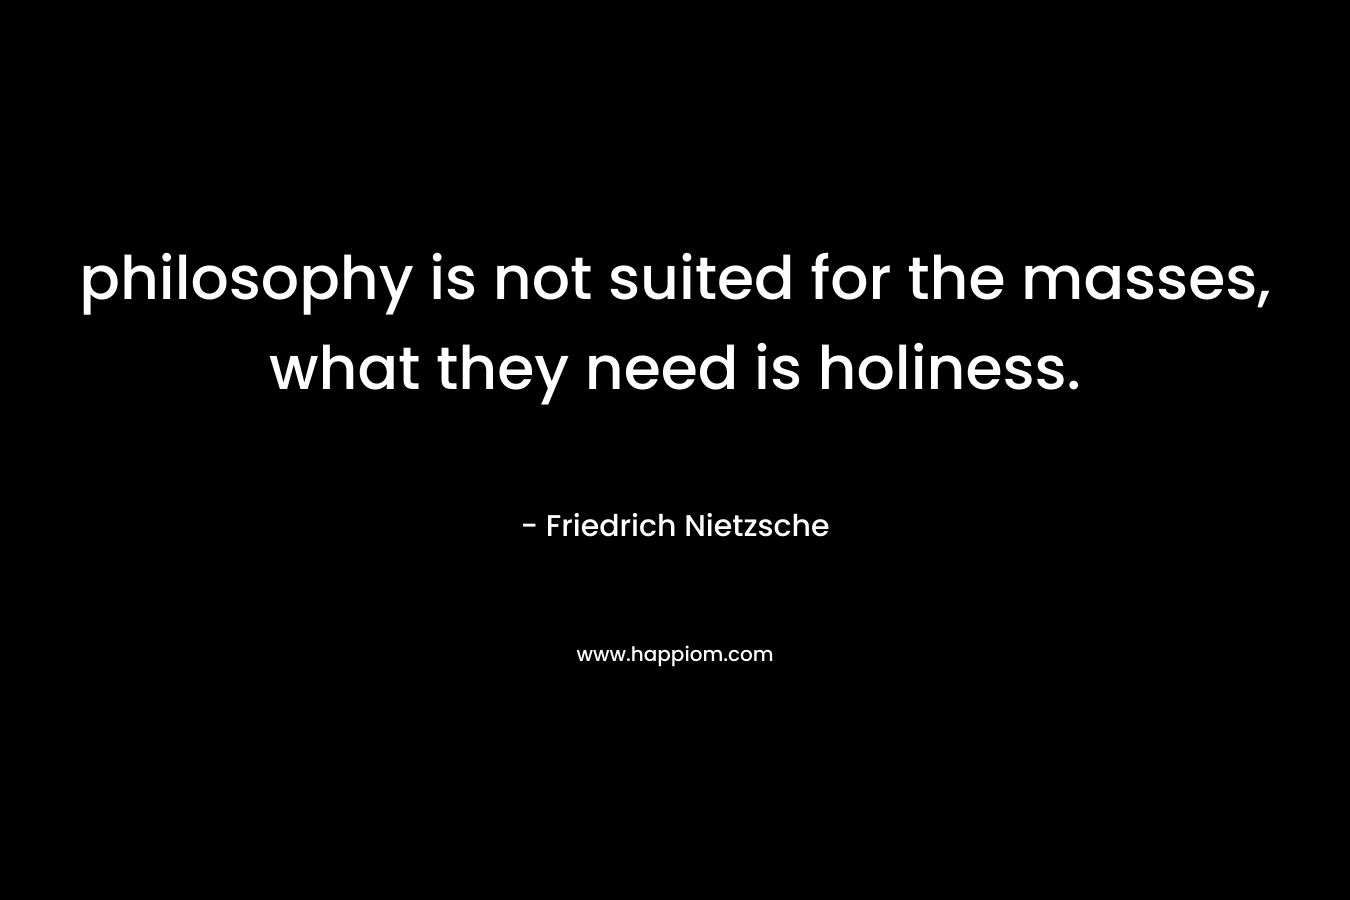 philosophy is not suited for the masses, what they need is holiness.